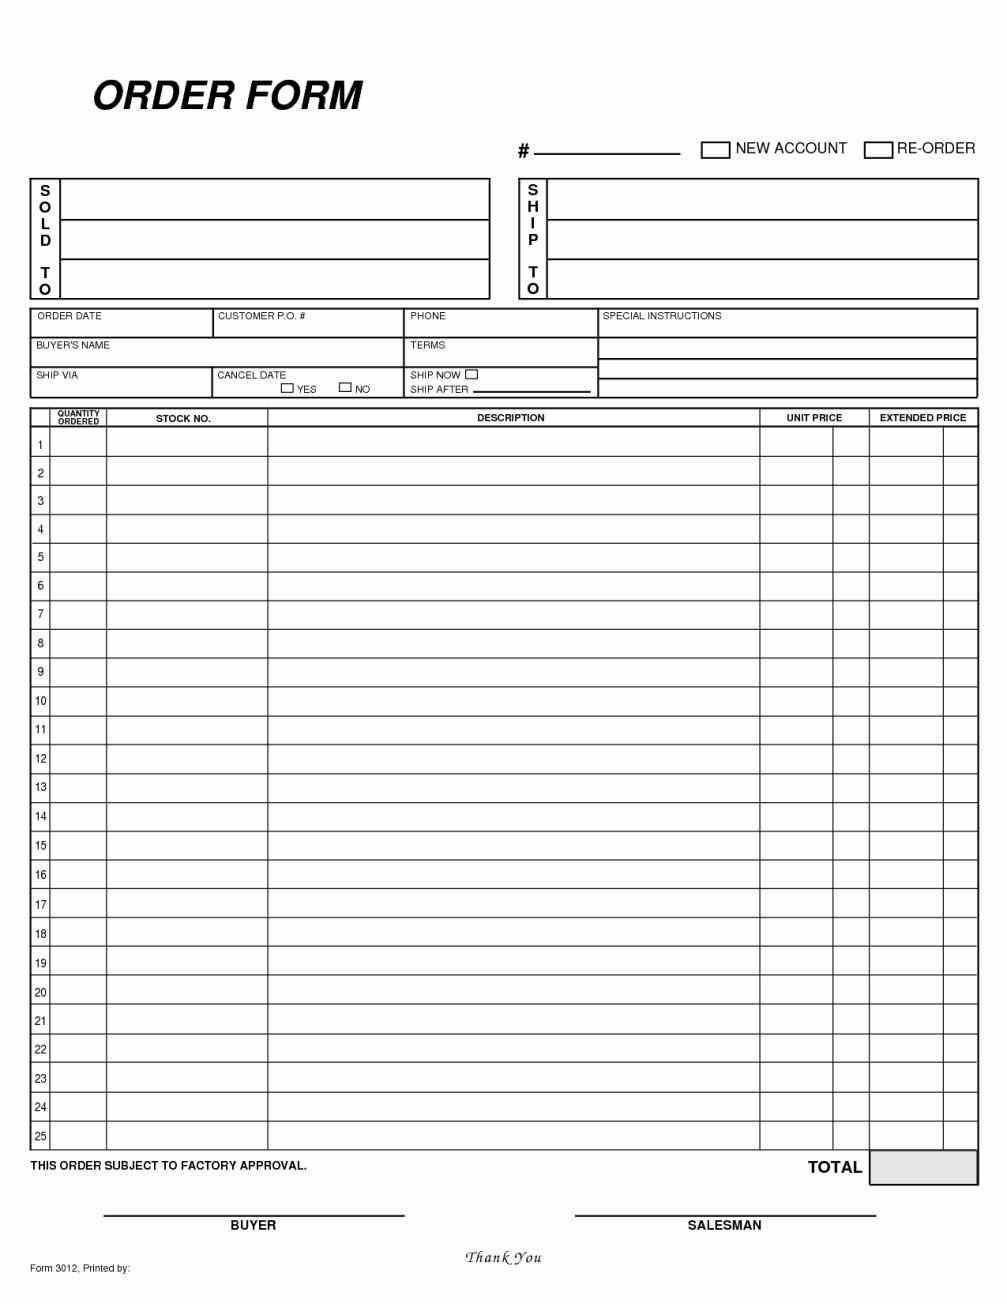 Ticket order form Template Word Highly Accessible Through De Simple order form Template